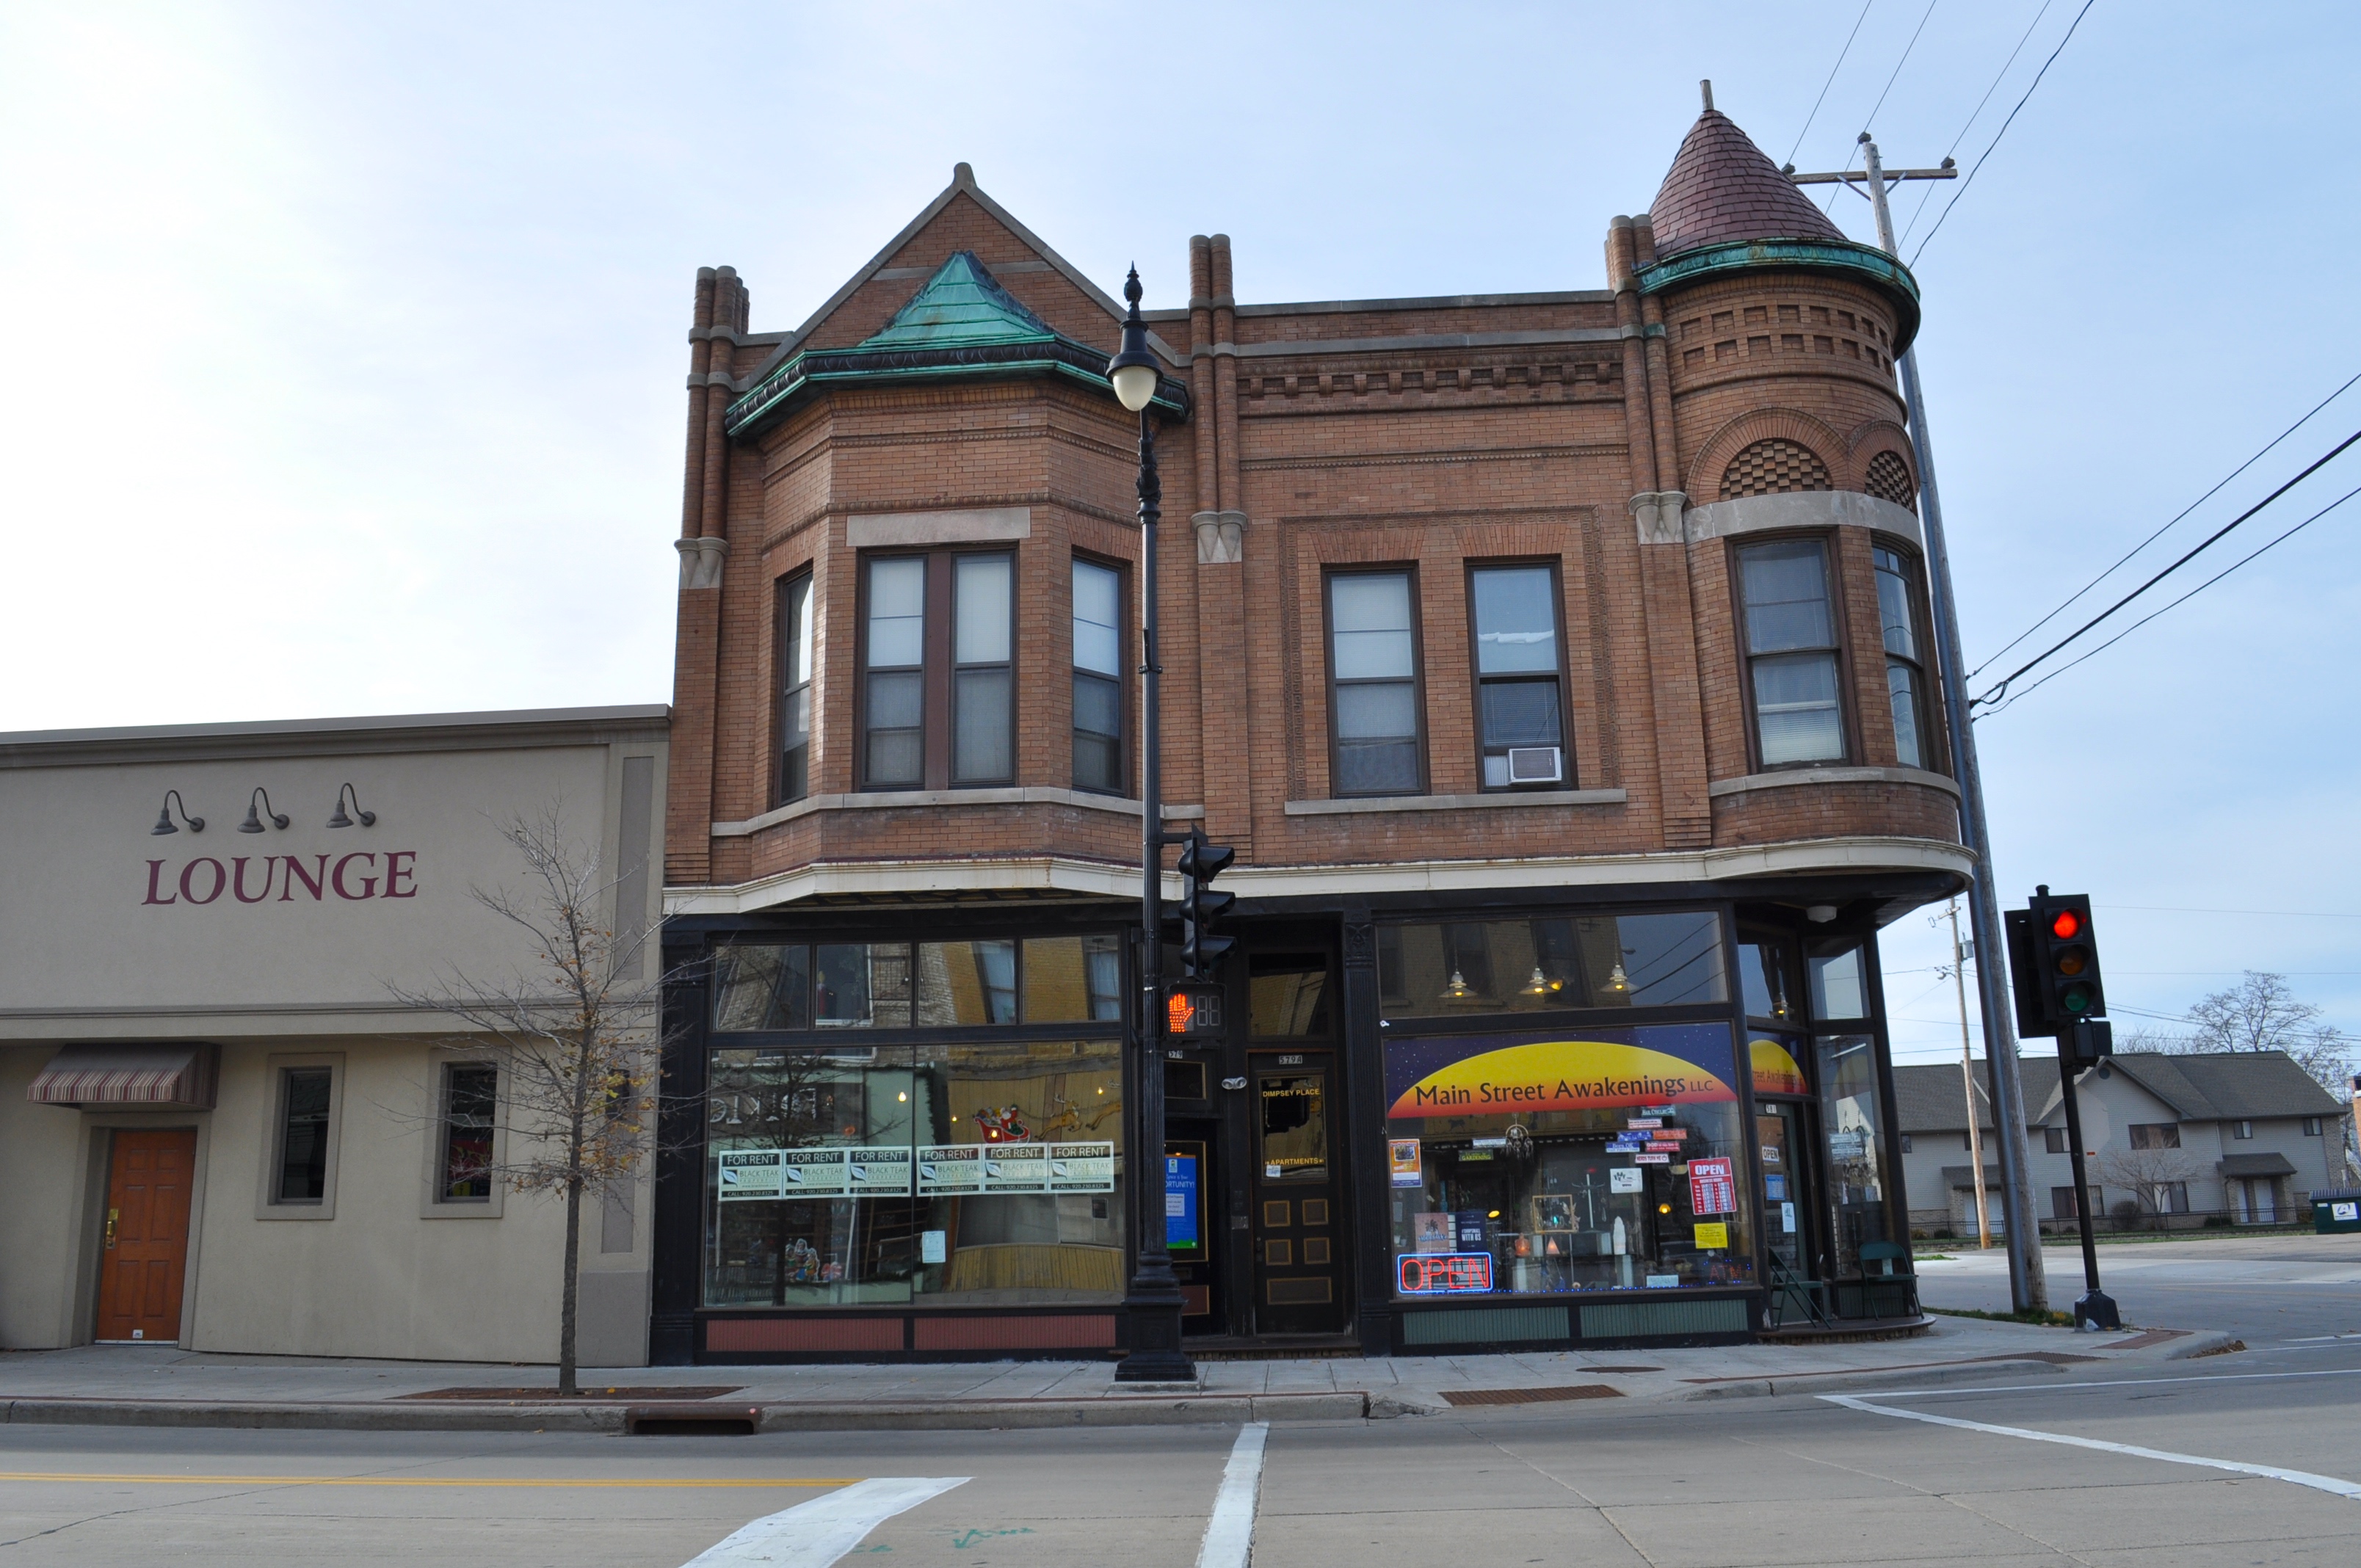 581 N. Main Street - Great office or retail space in Oshkosh!